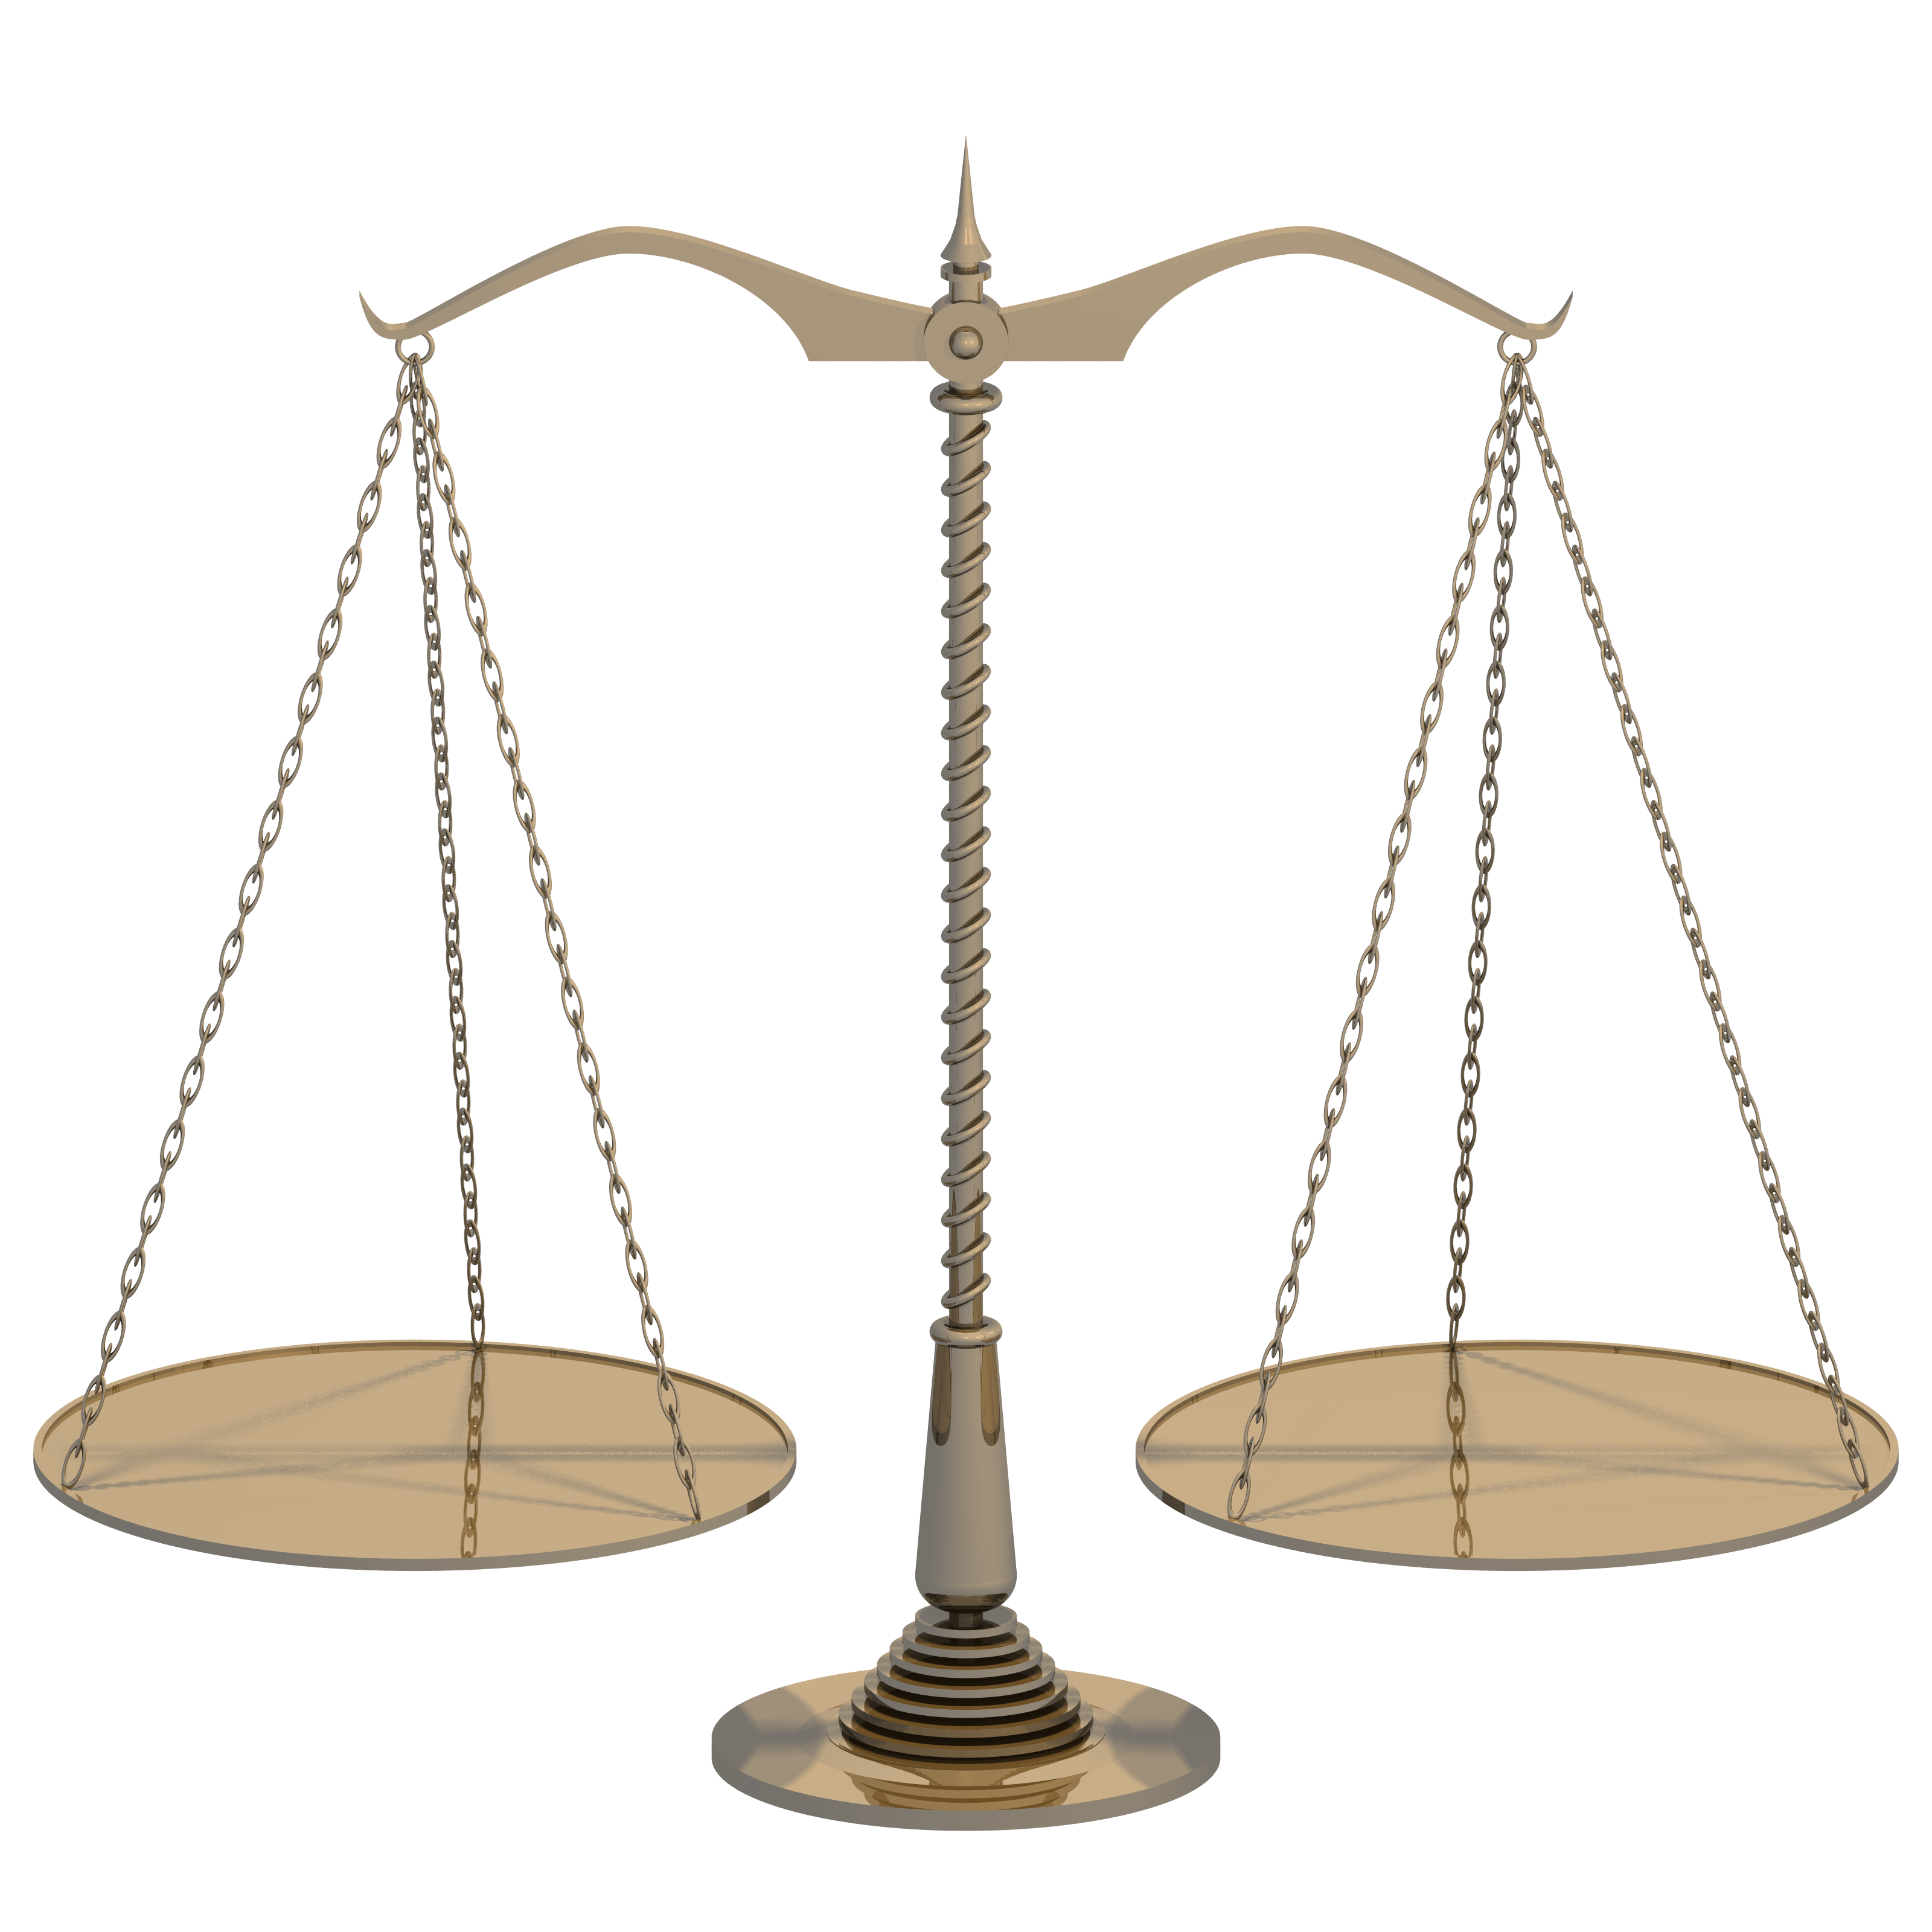 Balance Scales Clipart Free download on ClipArtMag.